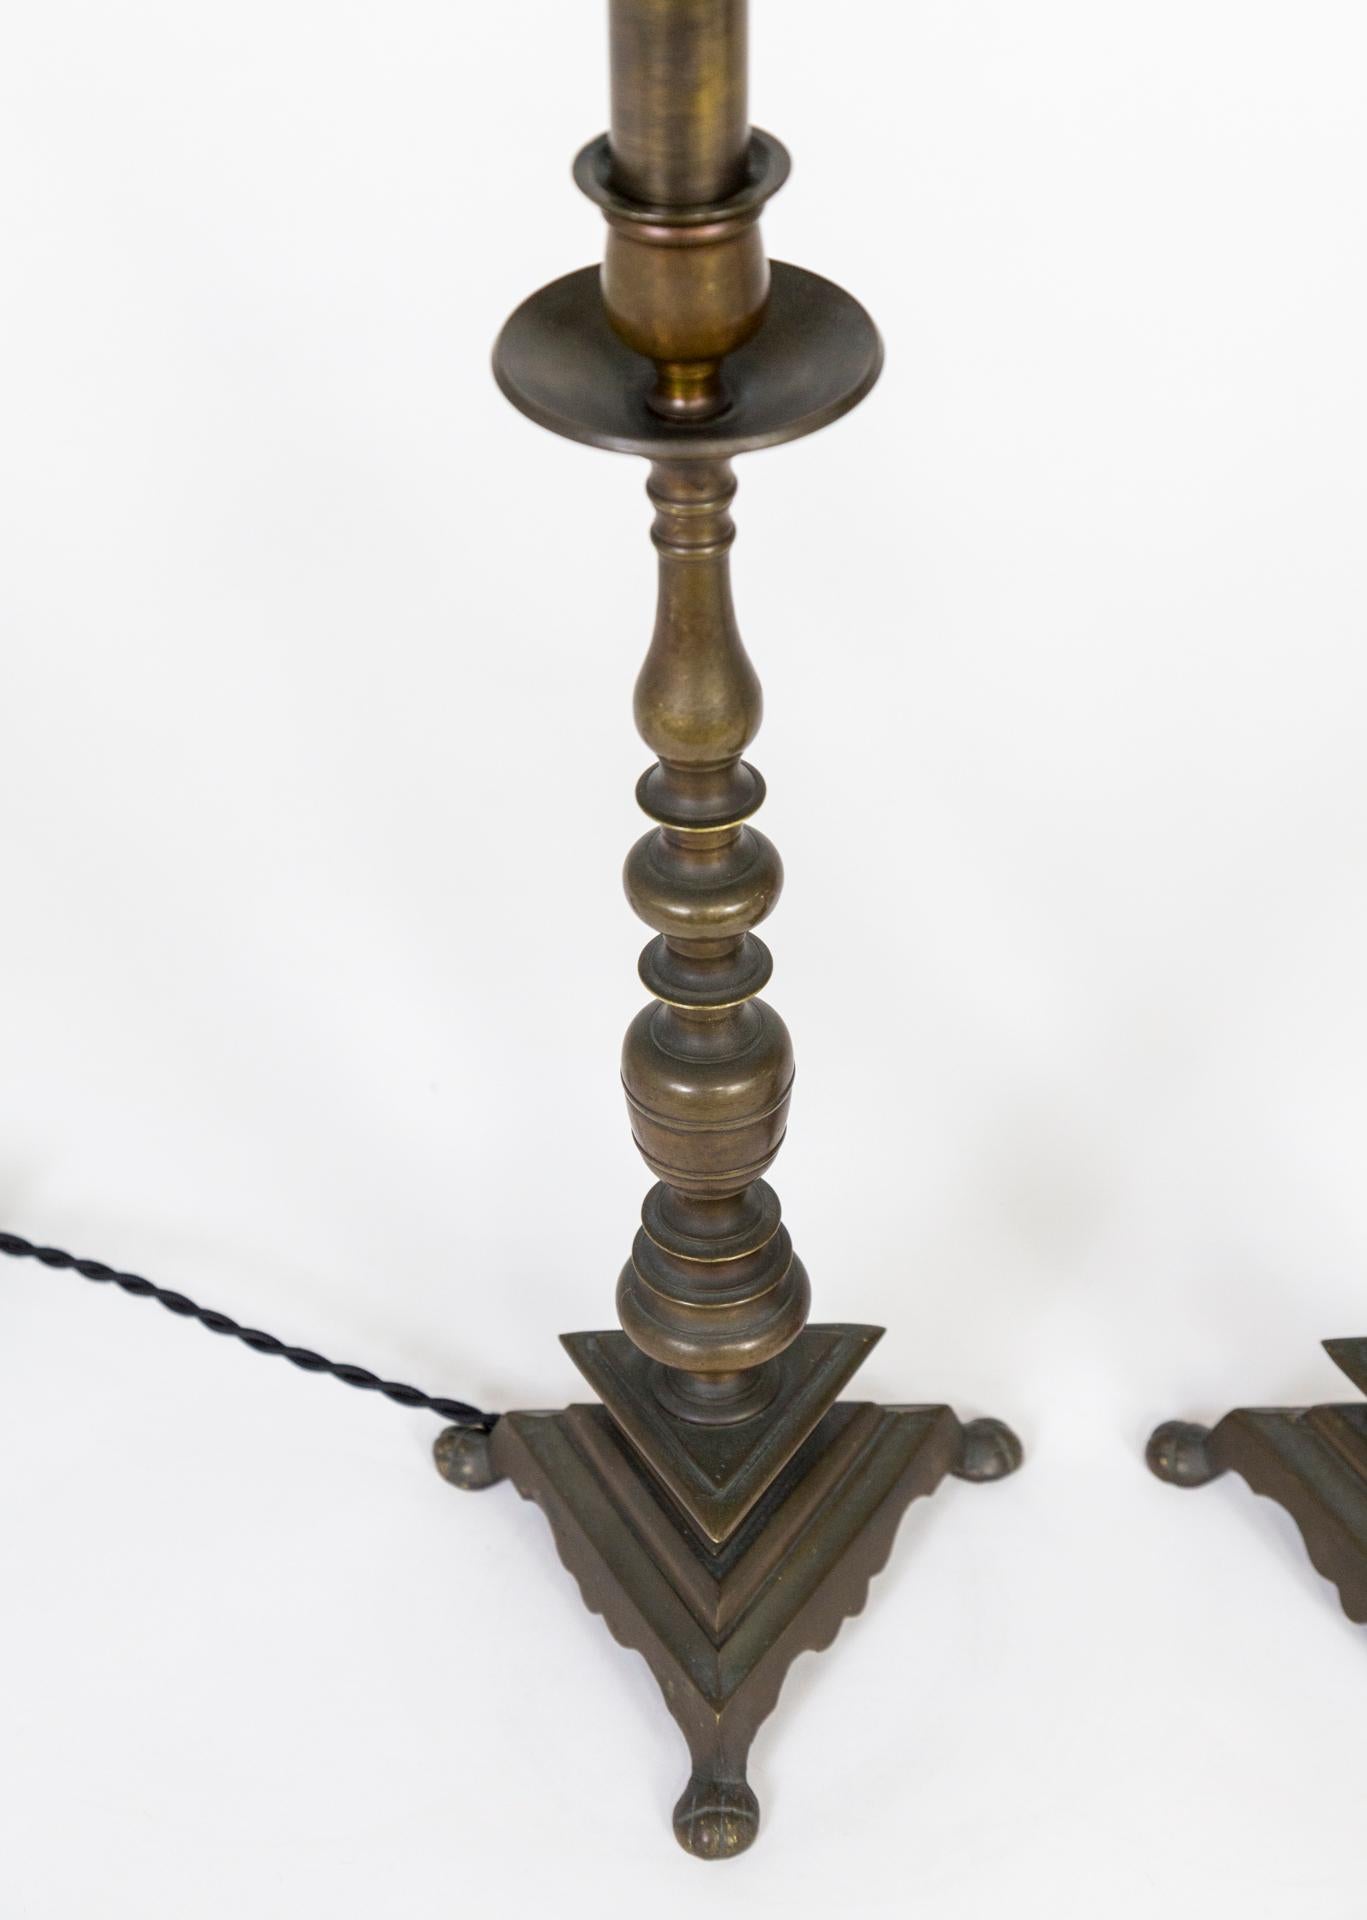 A pair of fine candlestick lamps in solid brass in a turned design with triangular bases. Candelabra sockets with matching deep bronze toned, brass candle covers, newly wired with fabric covered cord. Measures: 17” height x 6” width x 6.”